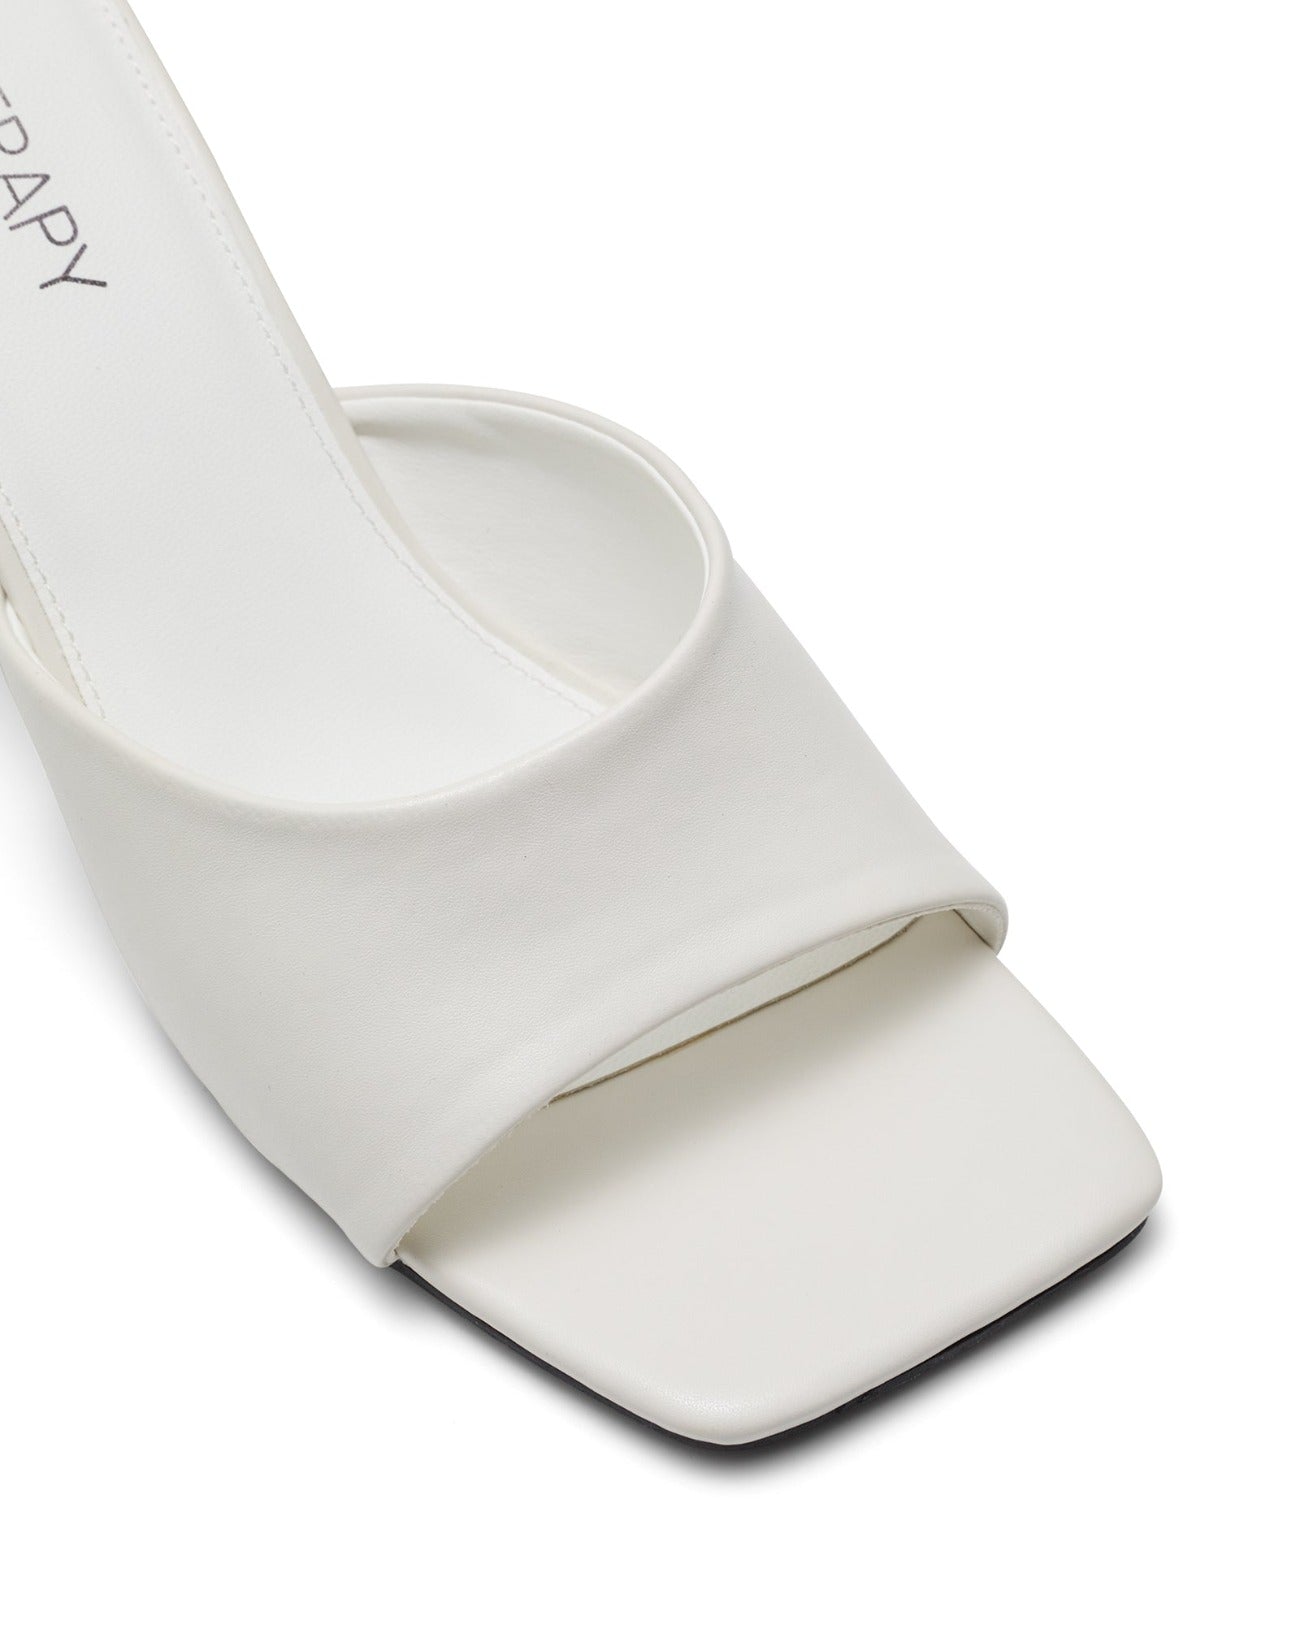 Therapy Shoes Prizm White | Women's Heels | Sandals | Mule | Square Toe